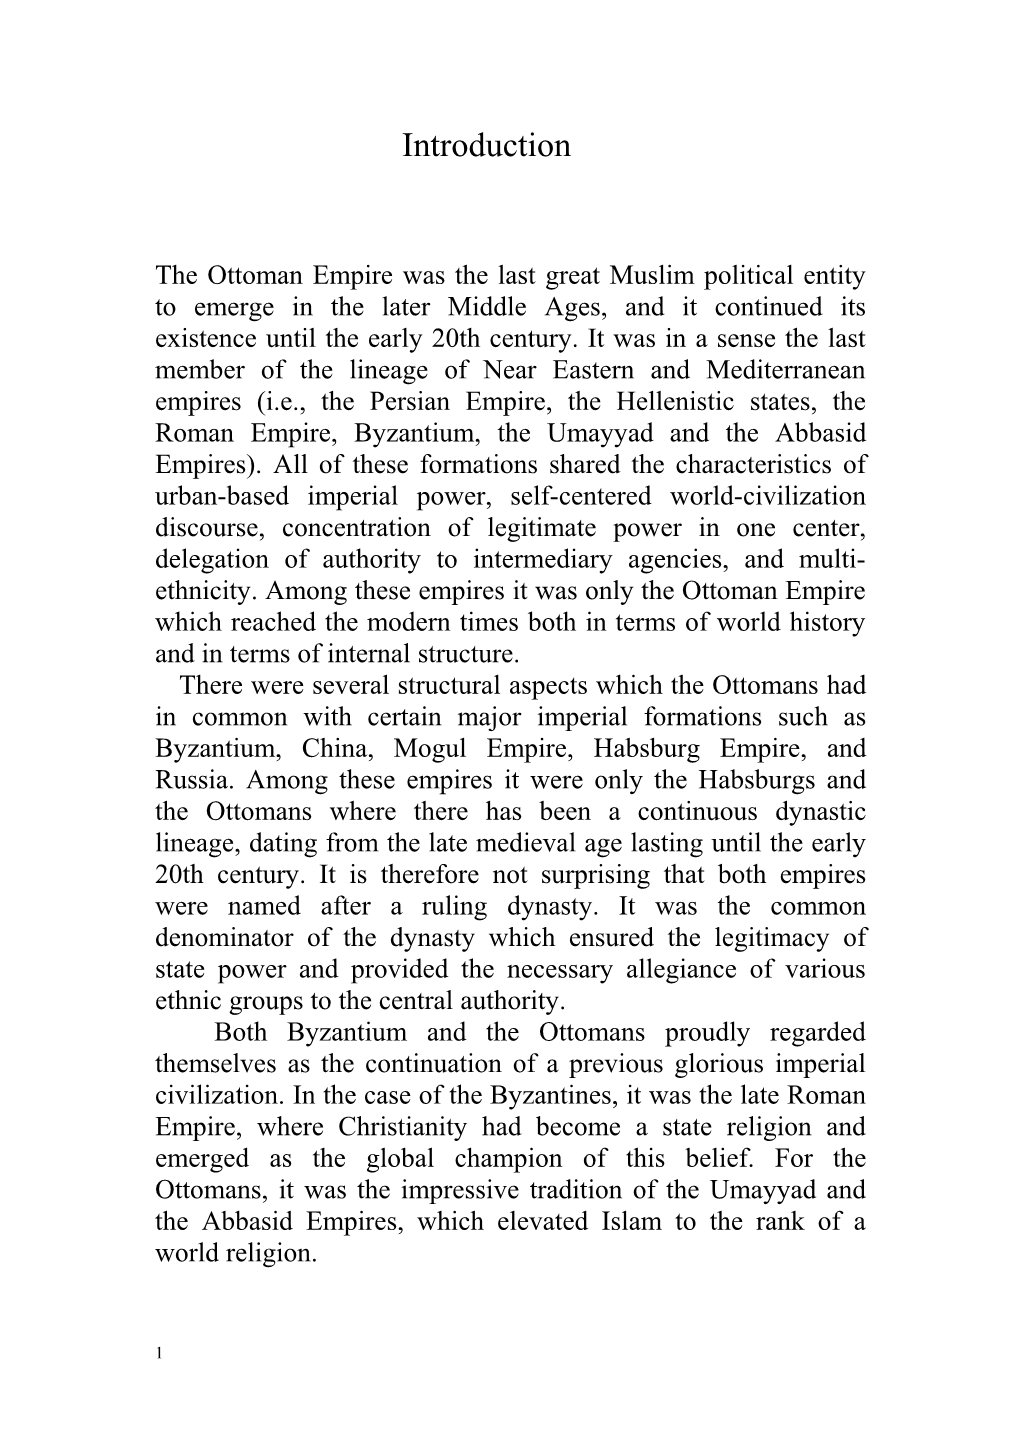 The Ottoman Empire Was the Last Great Muslim Political Entity to Emerge in the Later Middle